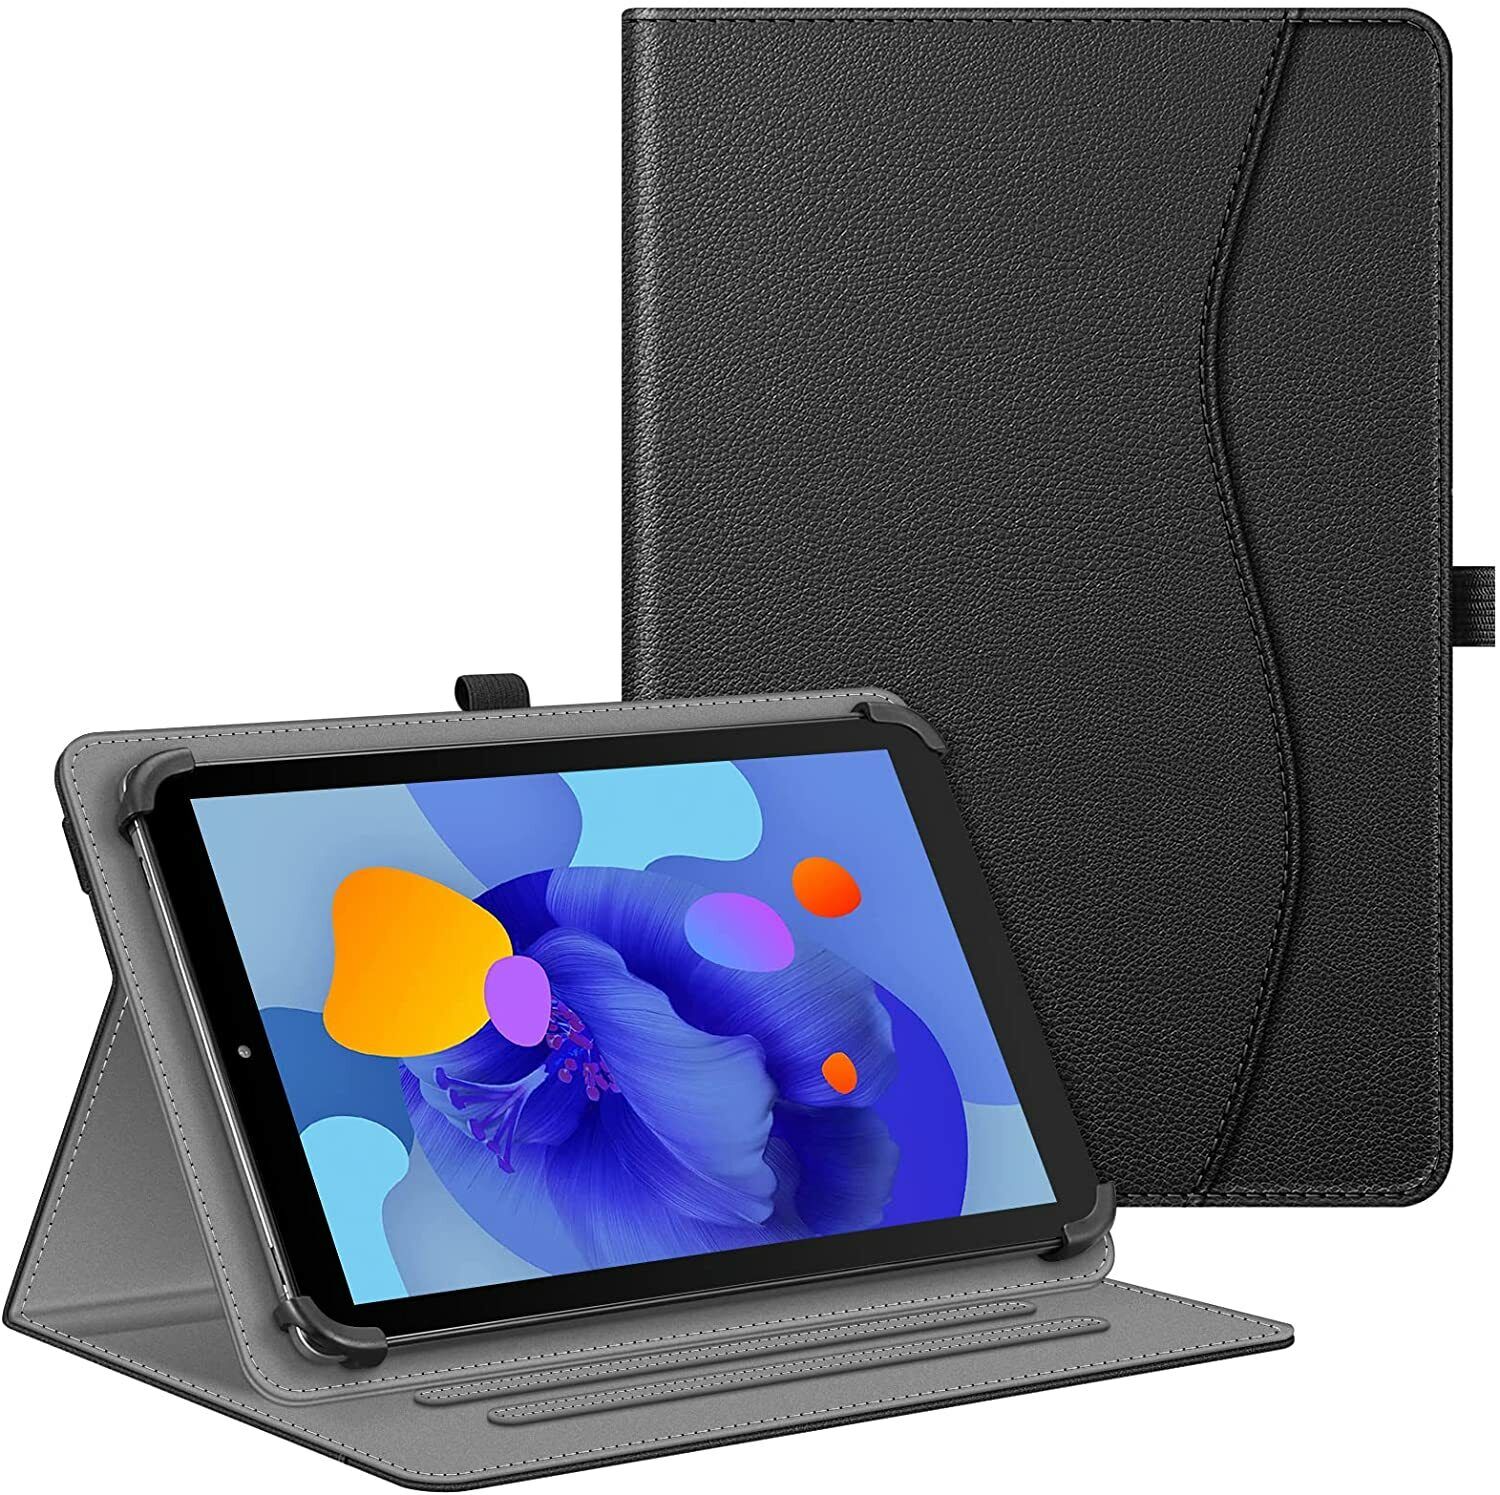 Universal Case for 9/10/10.1 Inch Tablet Folio Smart Stand Protective Cover